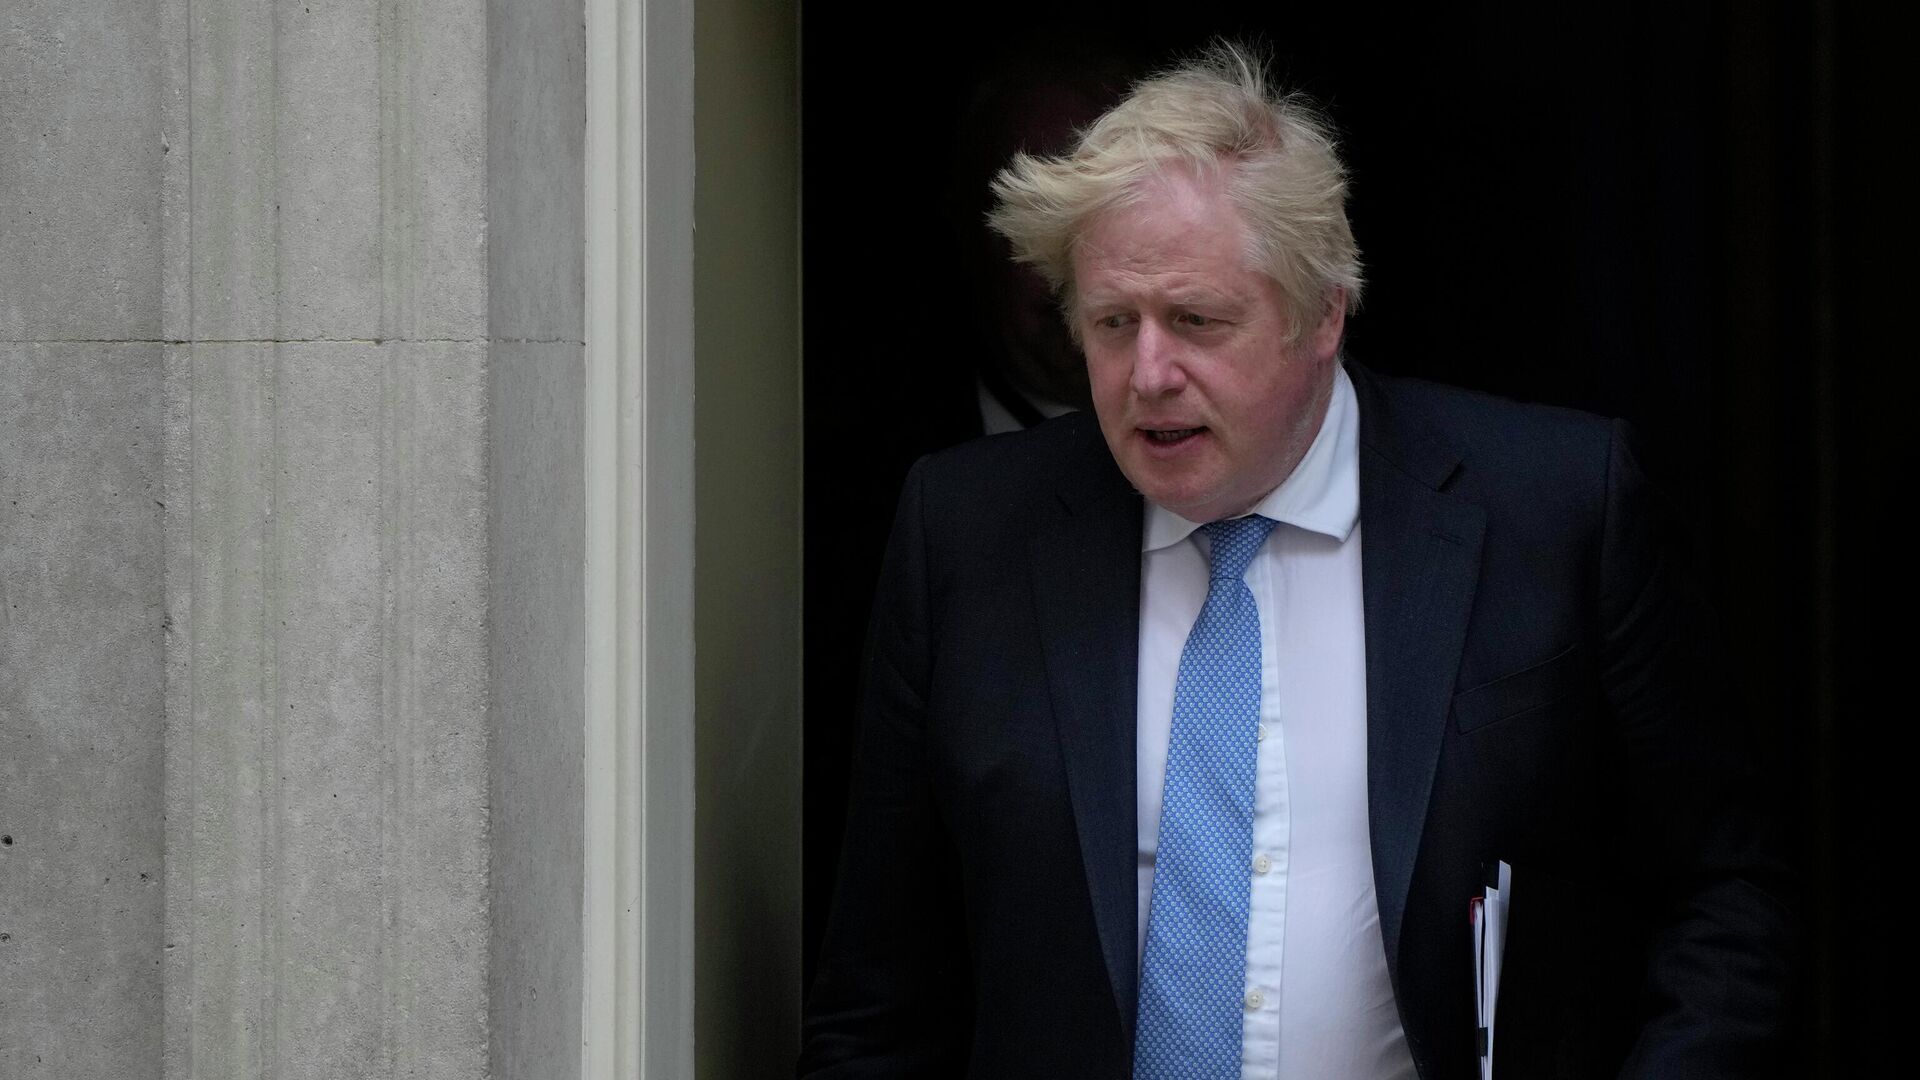 Britain's Prime Minister Boris Johnson leaves 10 Downing Street for the House of Commons to make a statement about Downing Street parties during the coronavirus lockdowns in London, Tuesday, April 19, 2022 - Sputnik International, 1920, 06.05.2022